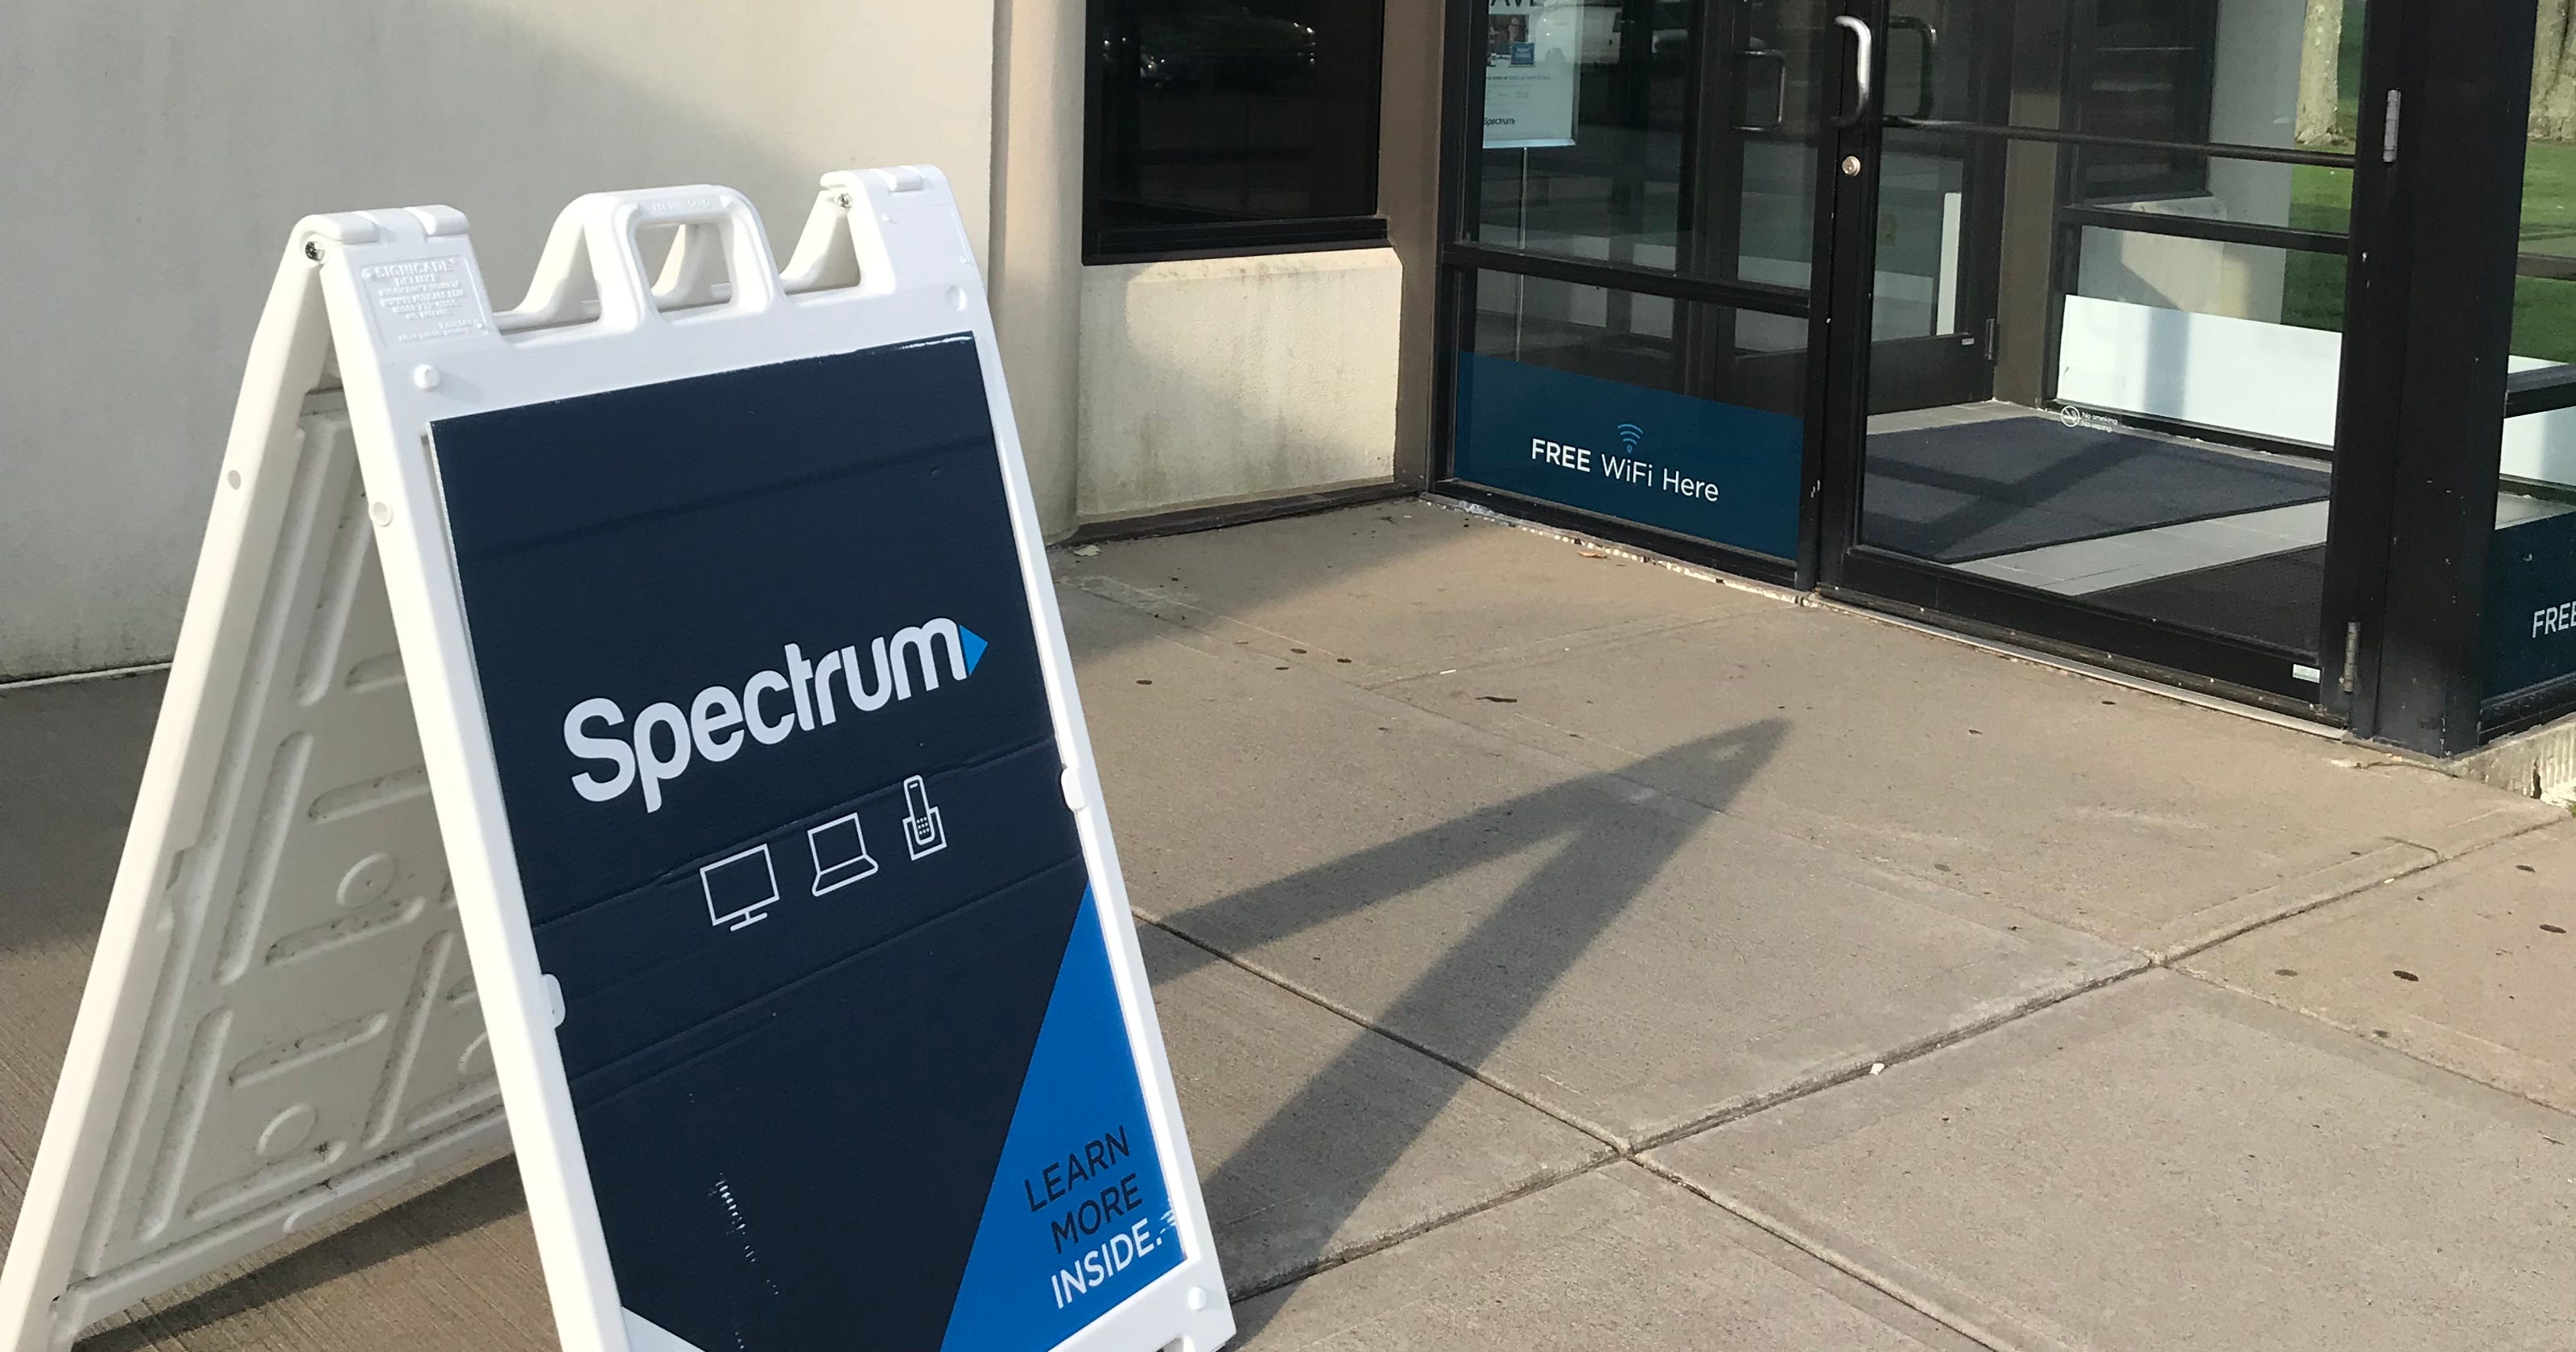 Charter/Spectrum to pay record 174.2M for defrauding NY customers